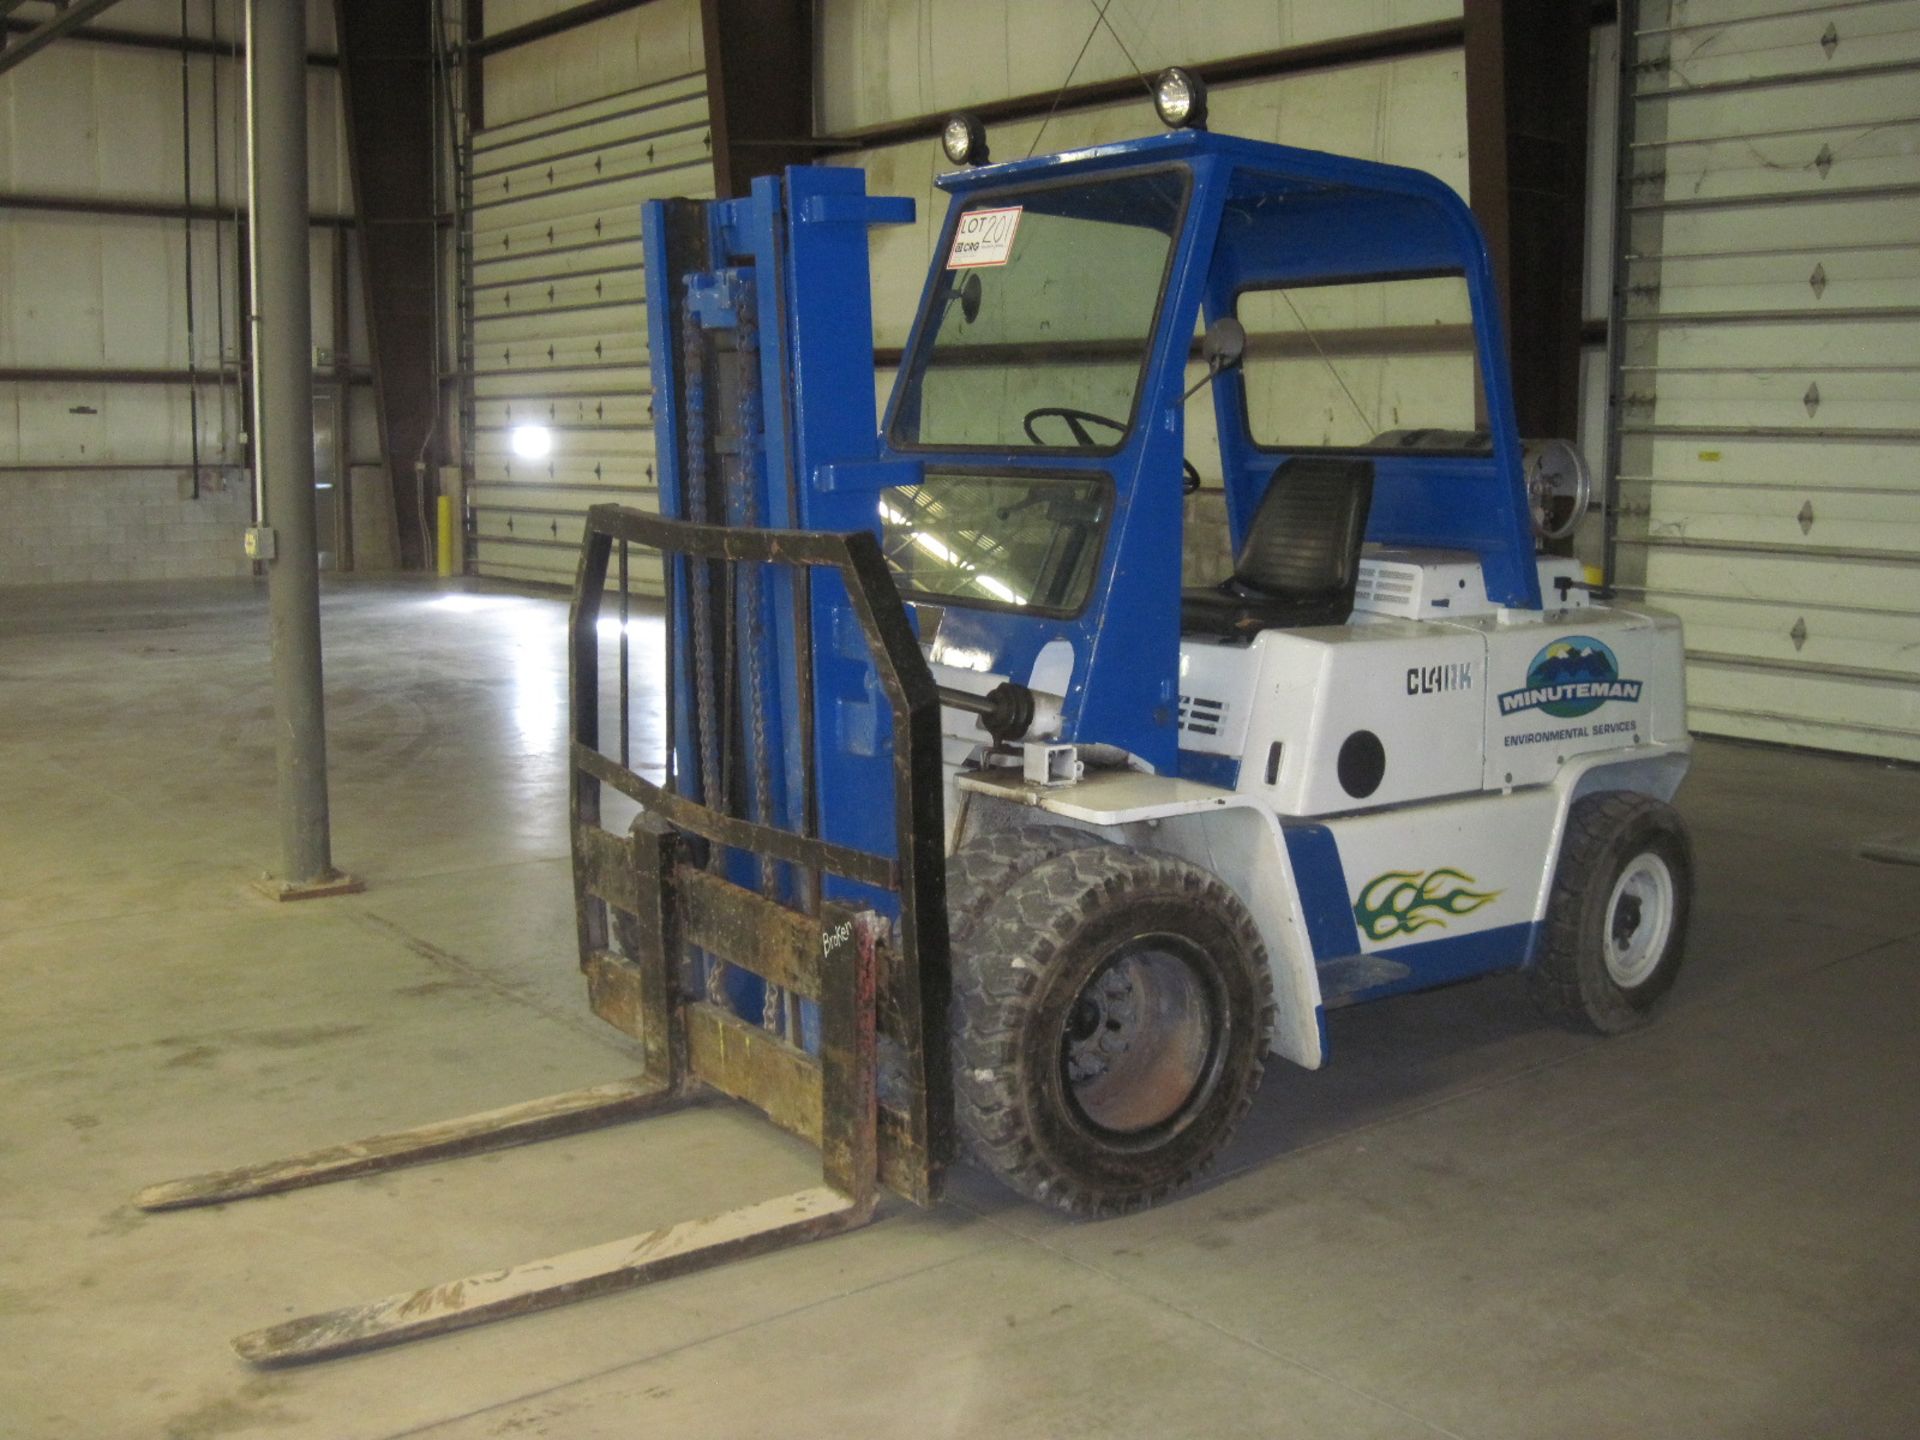 Clark propane powered forklift, M/N C500Y80, 8,000 lb cap, pneumatic tires, 2-stage mast, 123" - Image 2 of 5